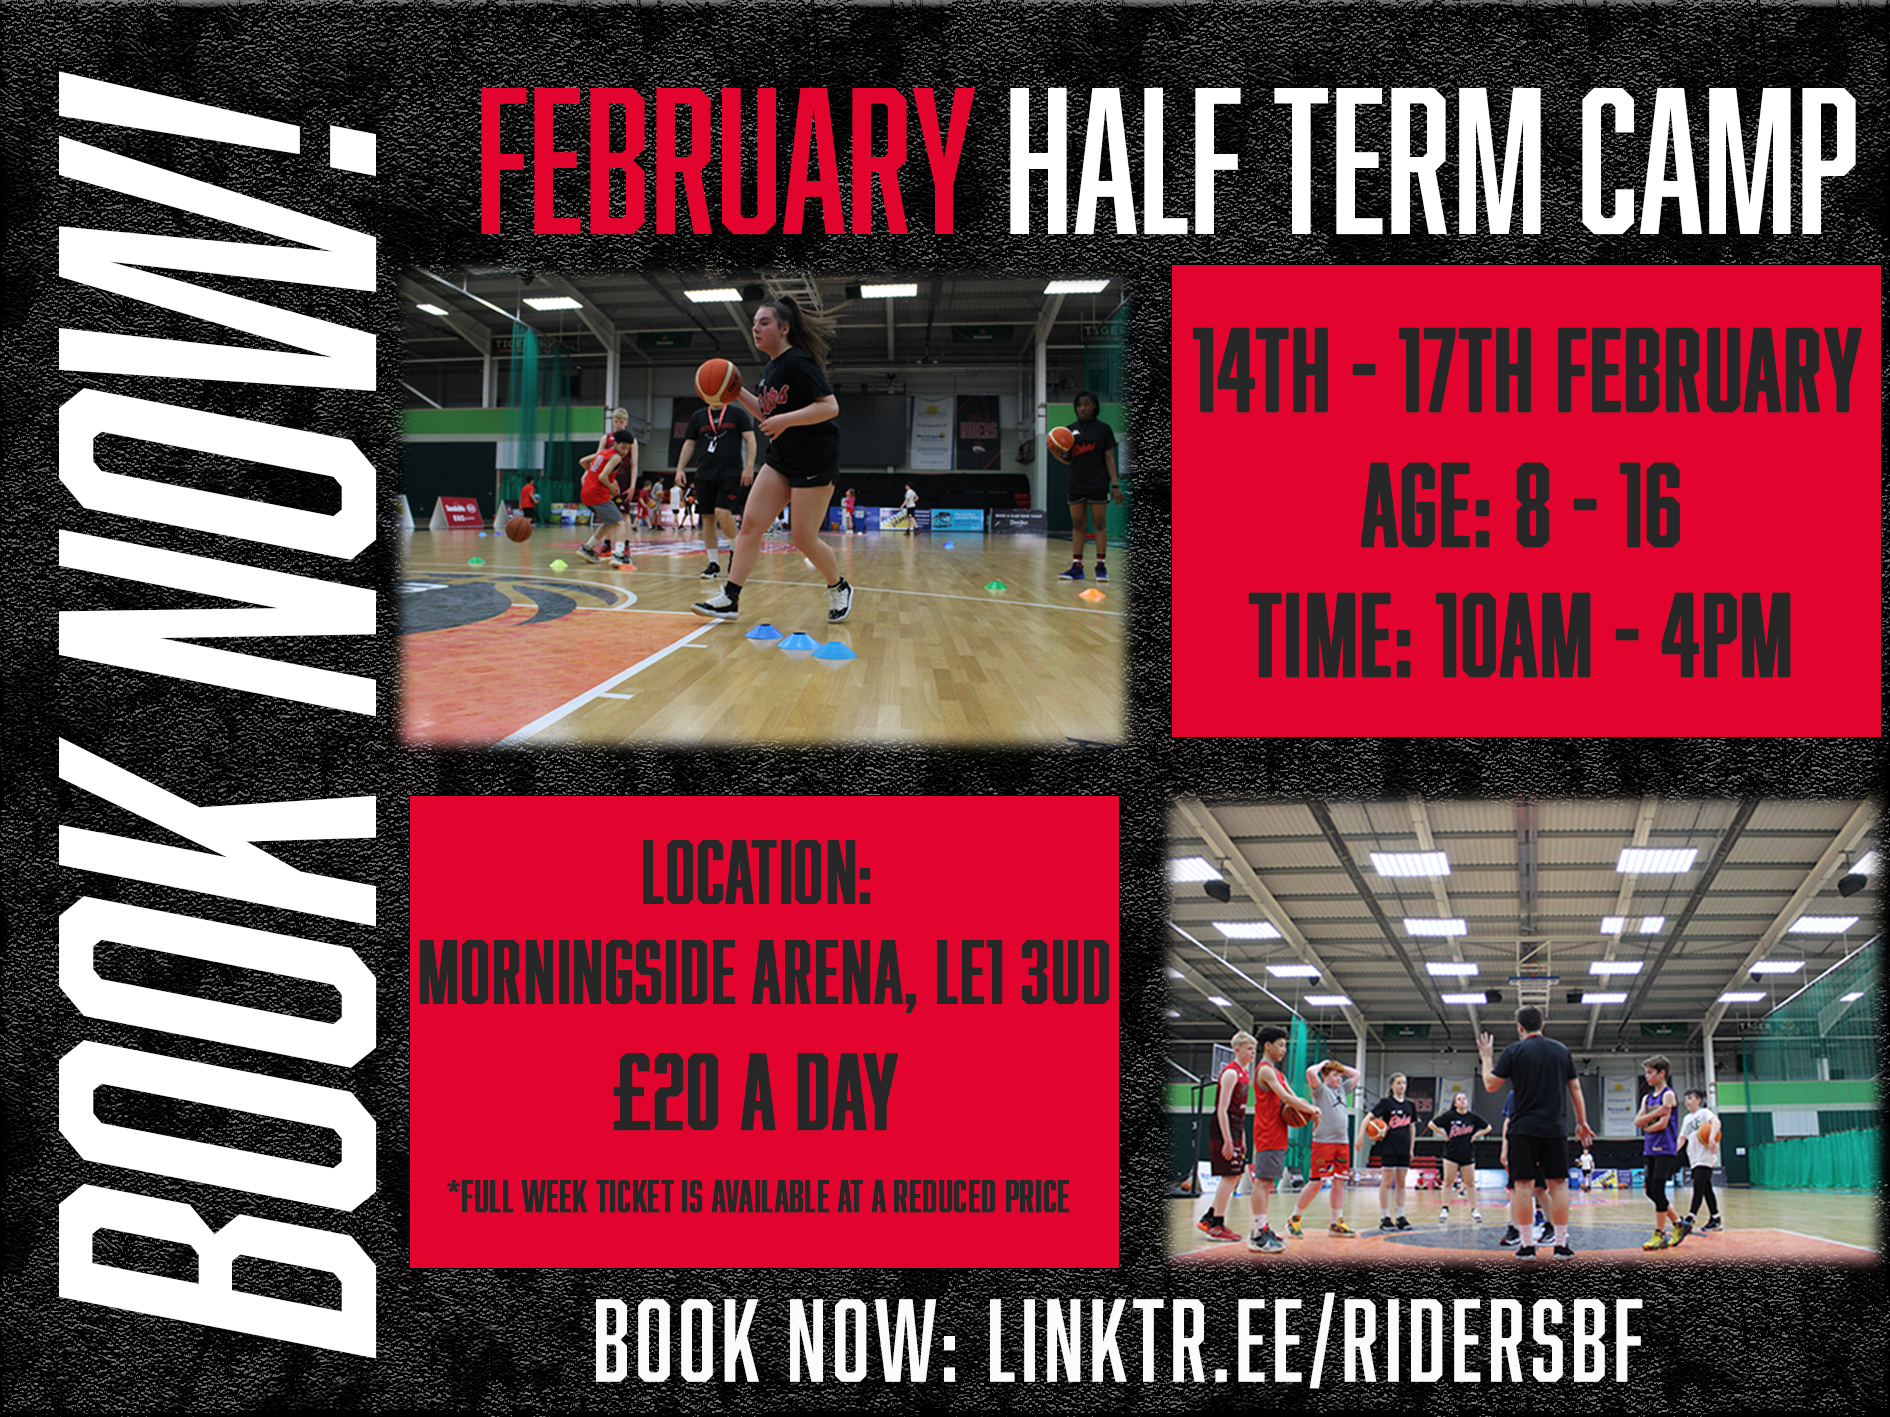 Book on our February Half Term Camp